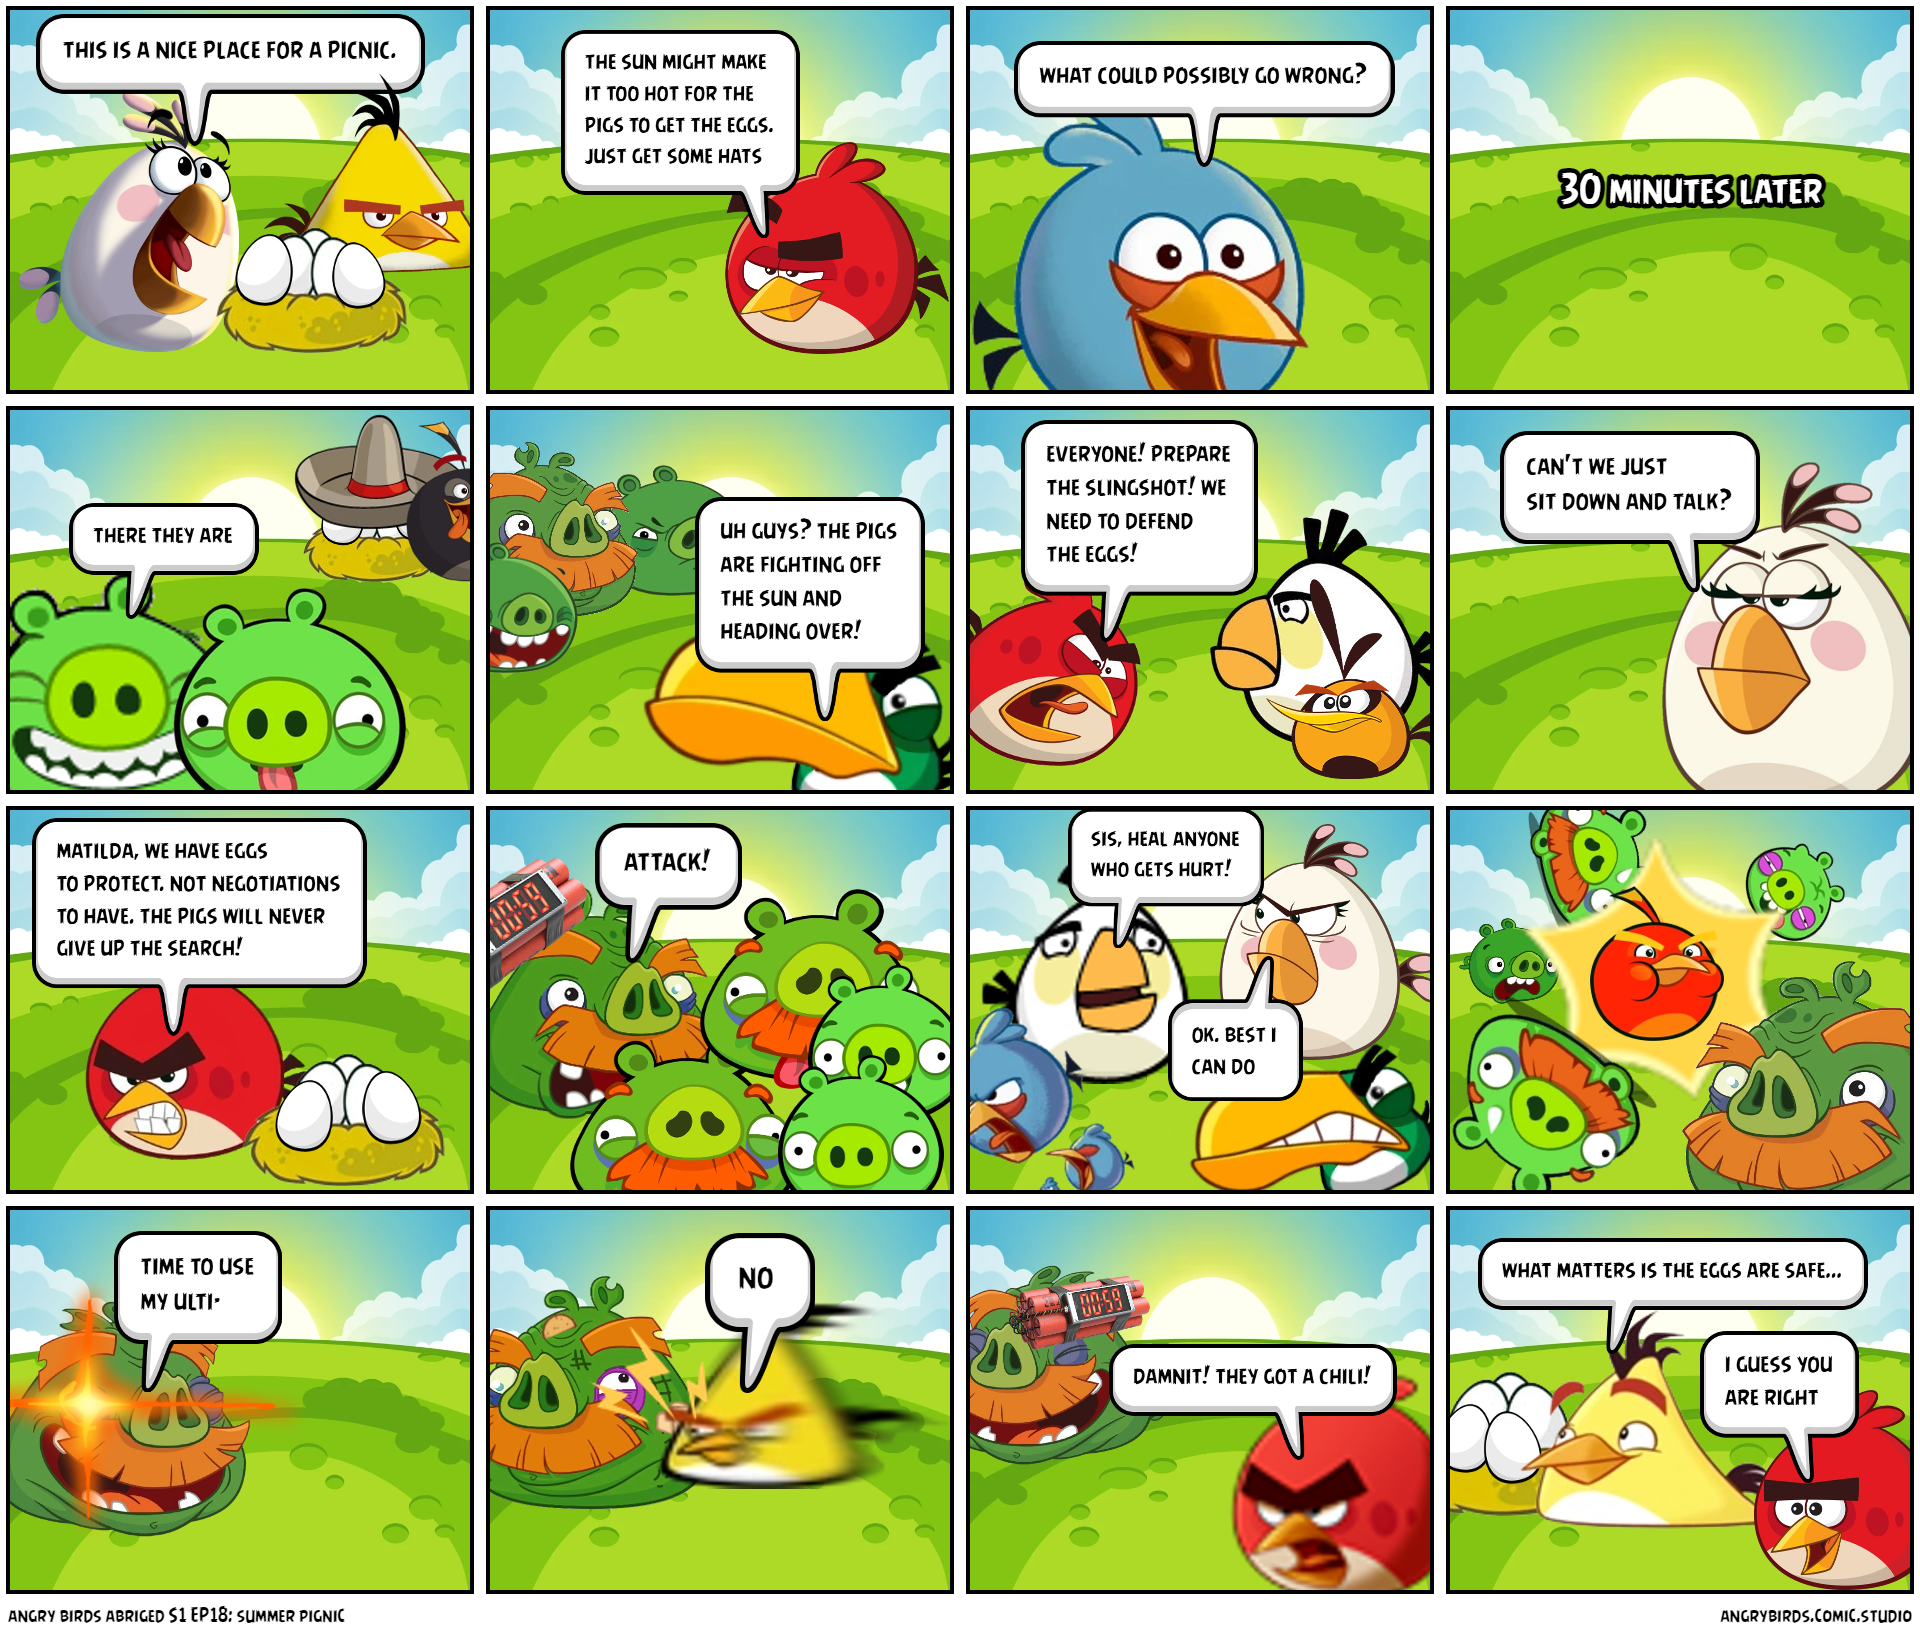 angry birds abriged S1 EP18: summer pignic